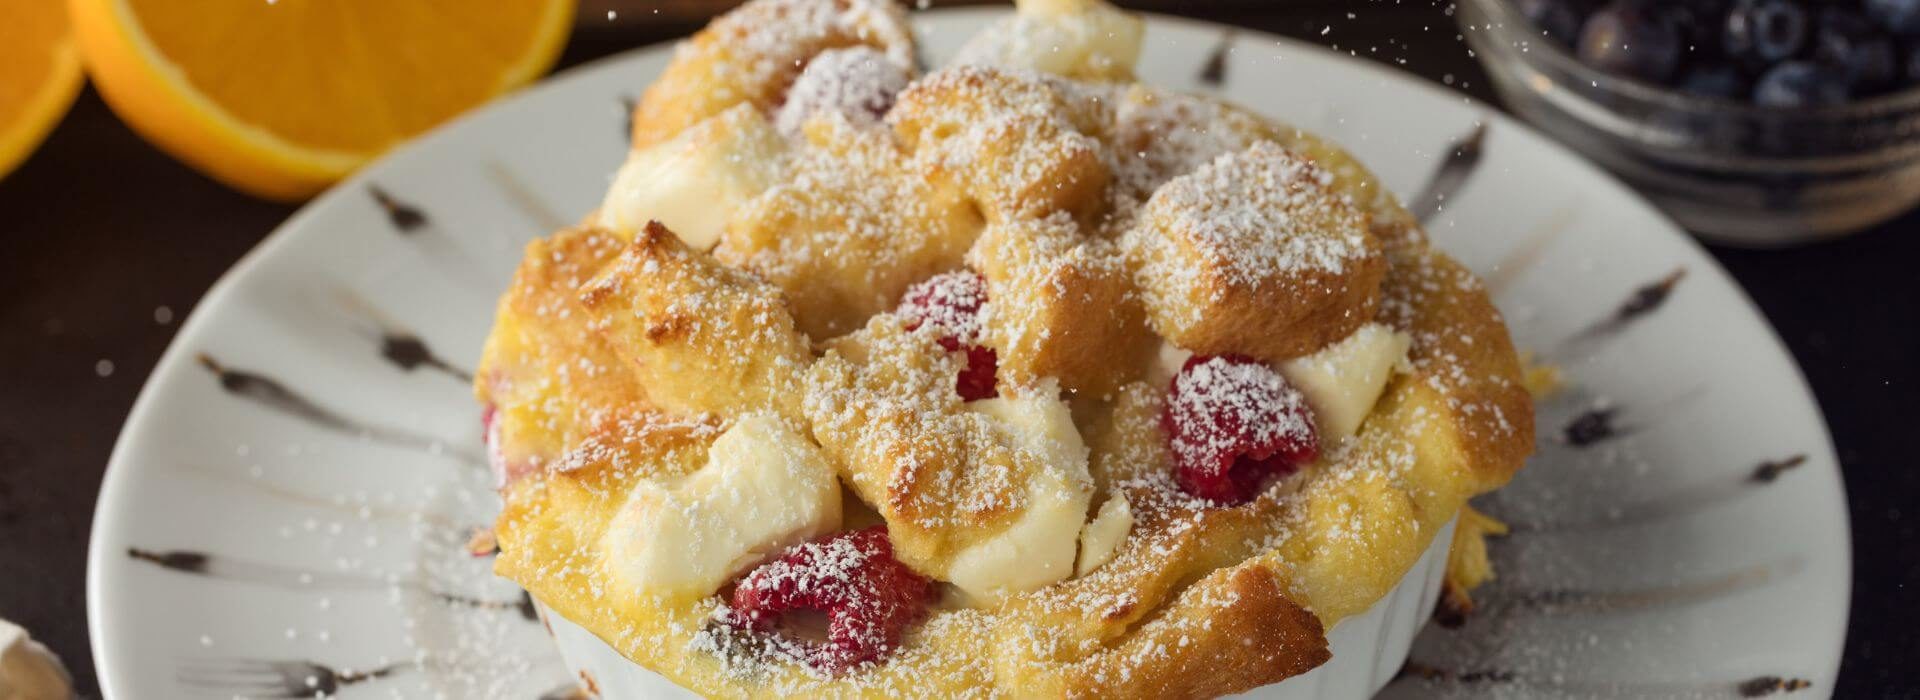 pieces of baked bread with bits of cream cheese and raspberries, dusted with powdered sugar in a white ramekin